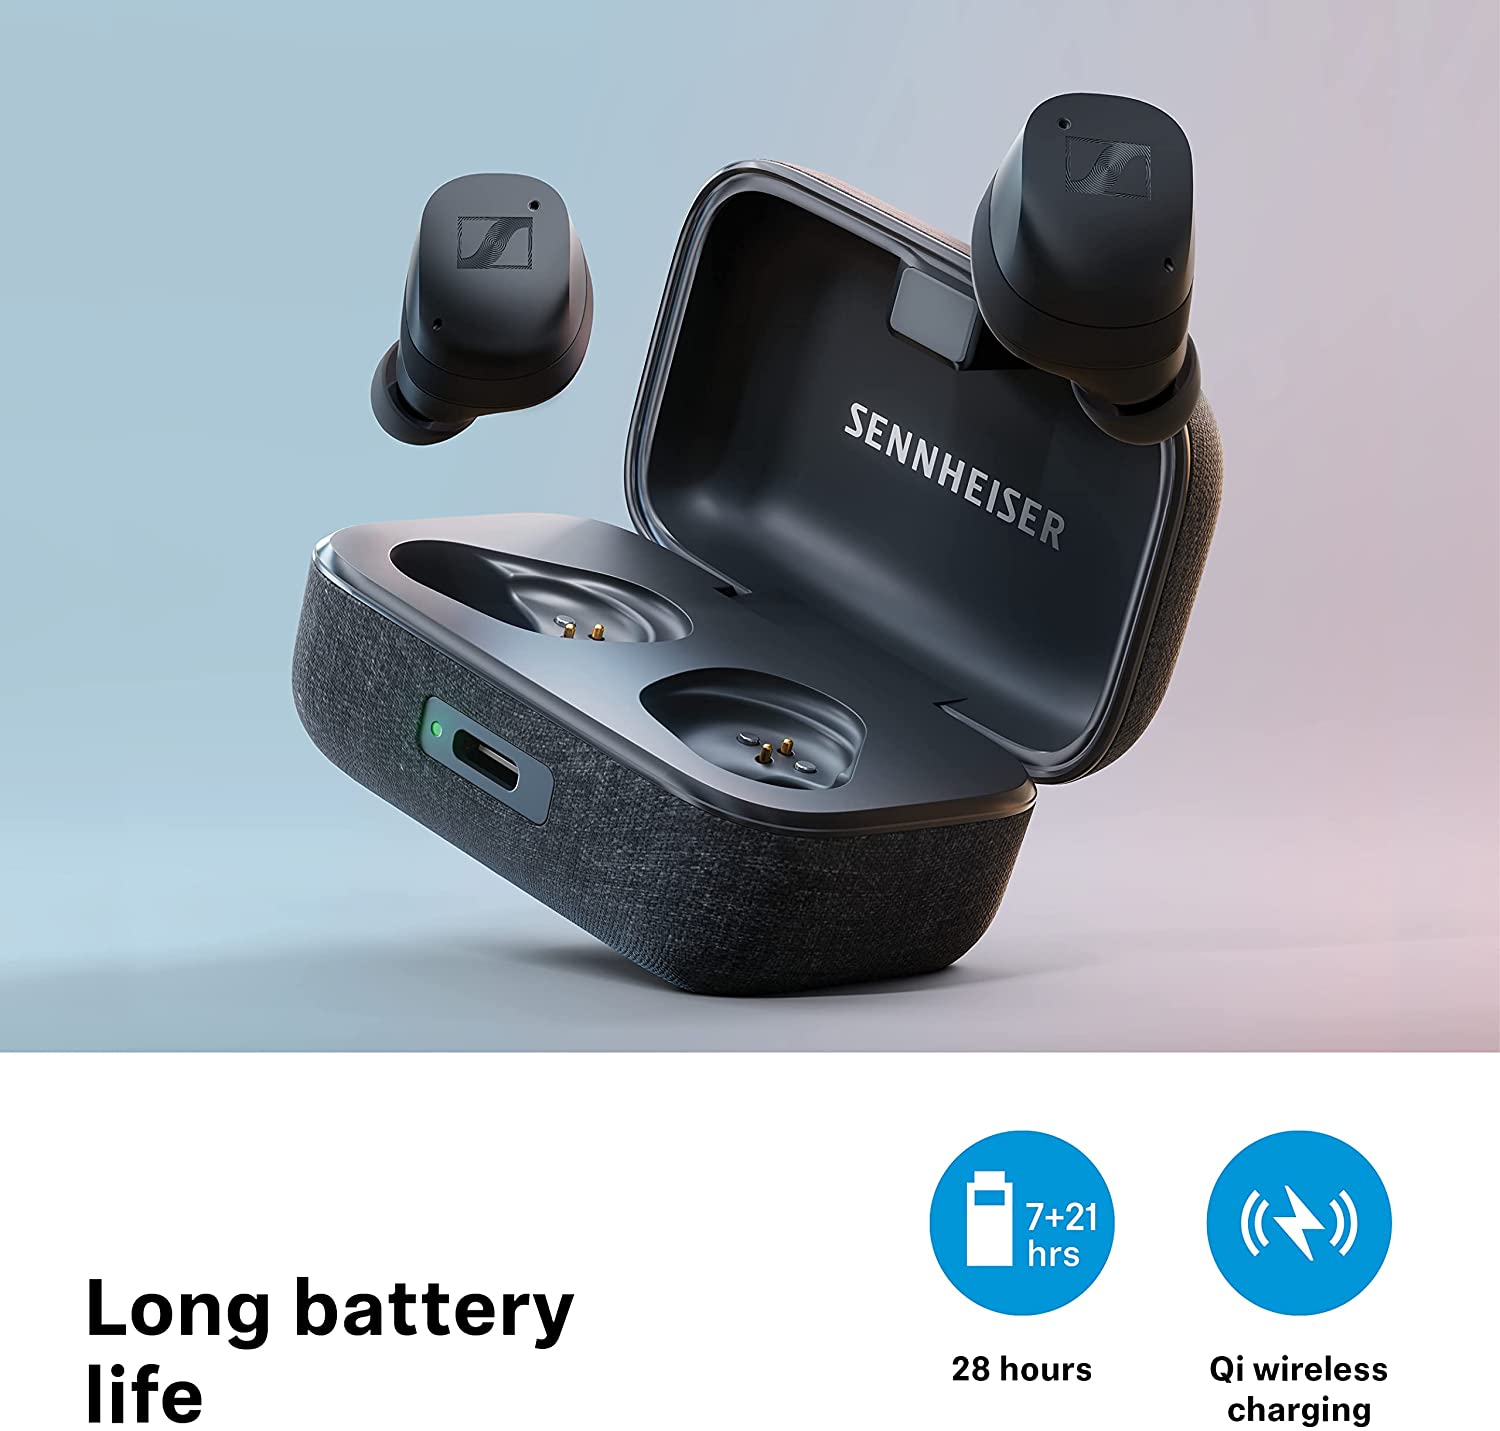 Sennheiser MOMENTUM True Wireless 3 Earbuds -Bluetooth In-Ear Headphones for Music and Calls with ANC, Multipoint connectivity , IPX4, Qi charging, 28-hour Battery Life Compact Design - Black - image 5 of 5